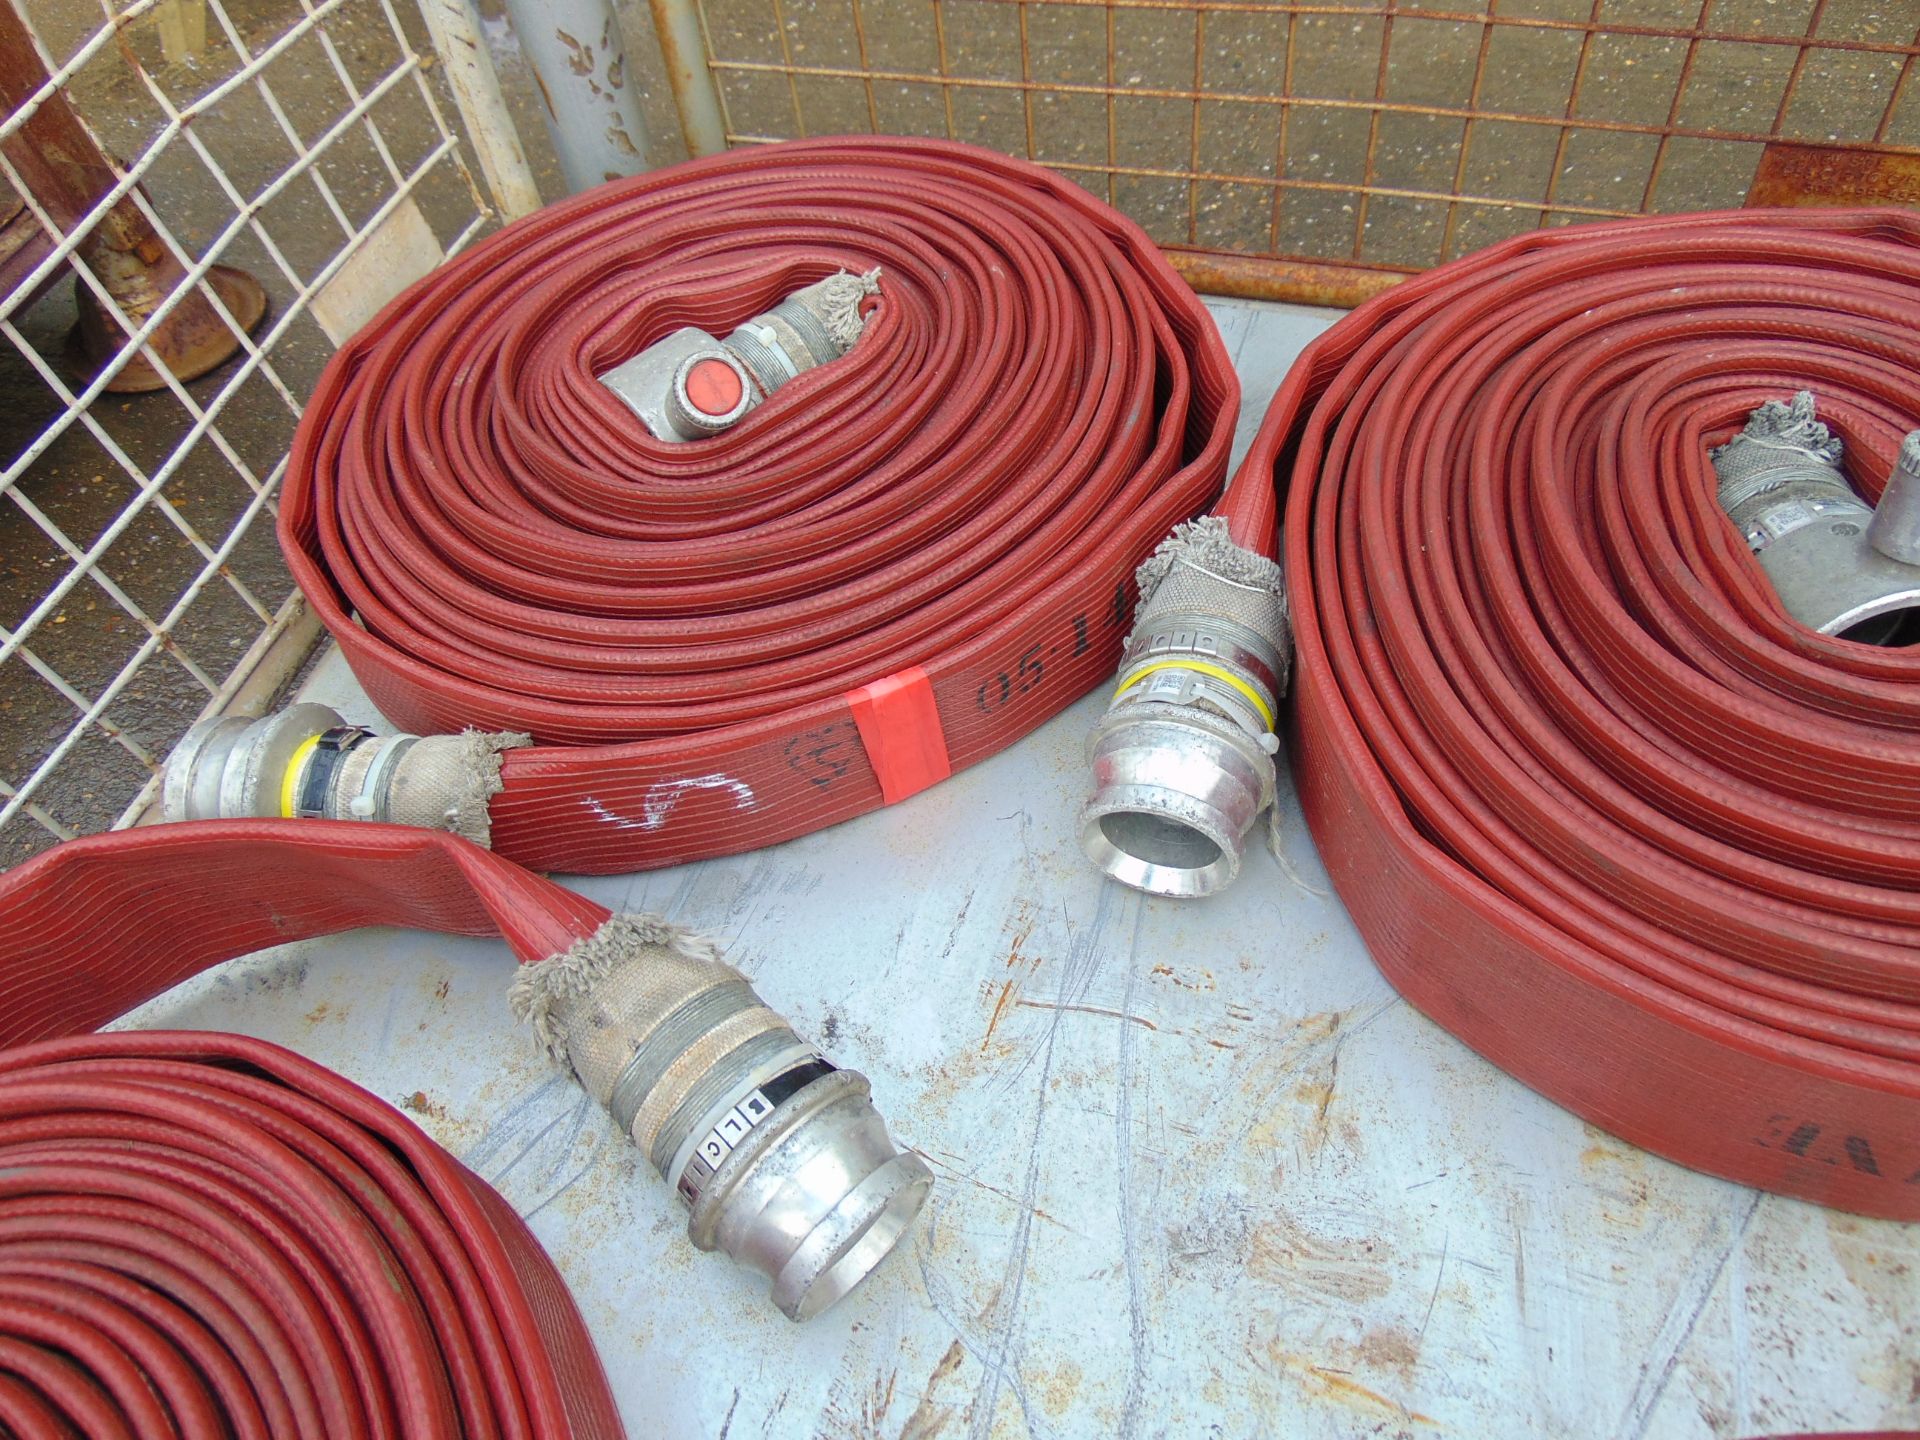 4 x Angus Layflat Fire Hoses with Couplings - Image 2 of 3